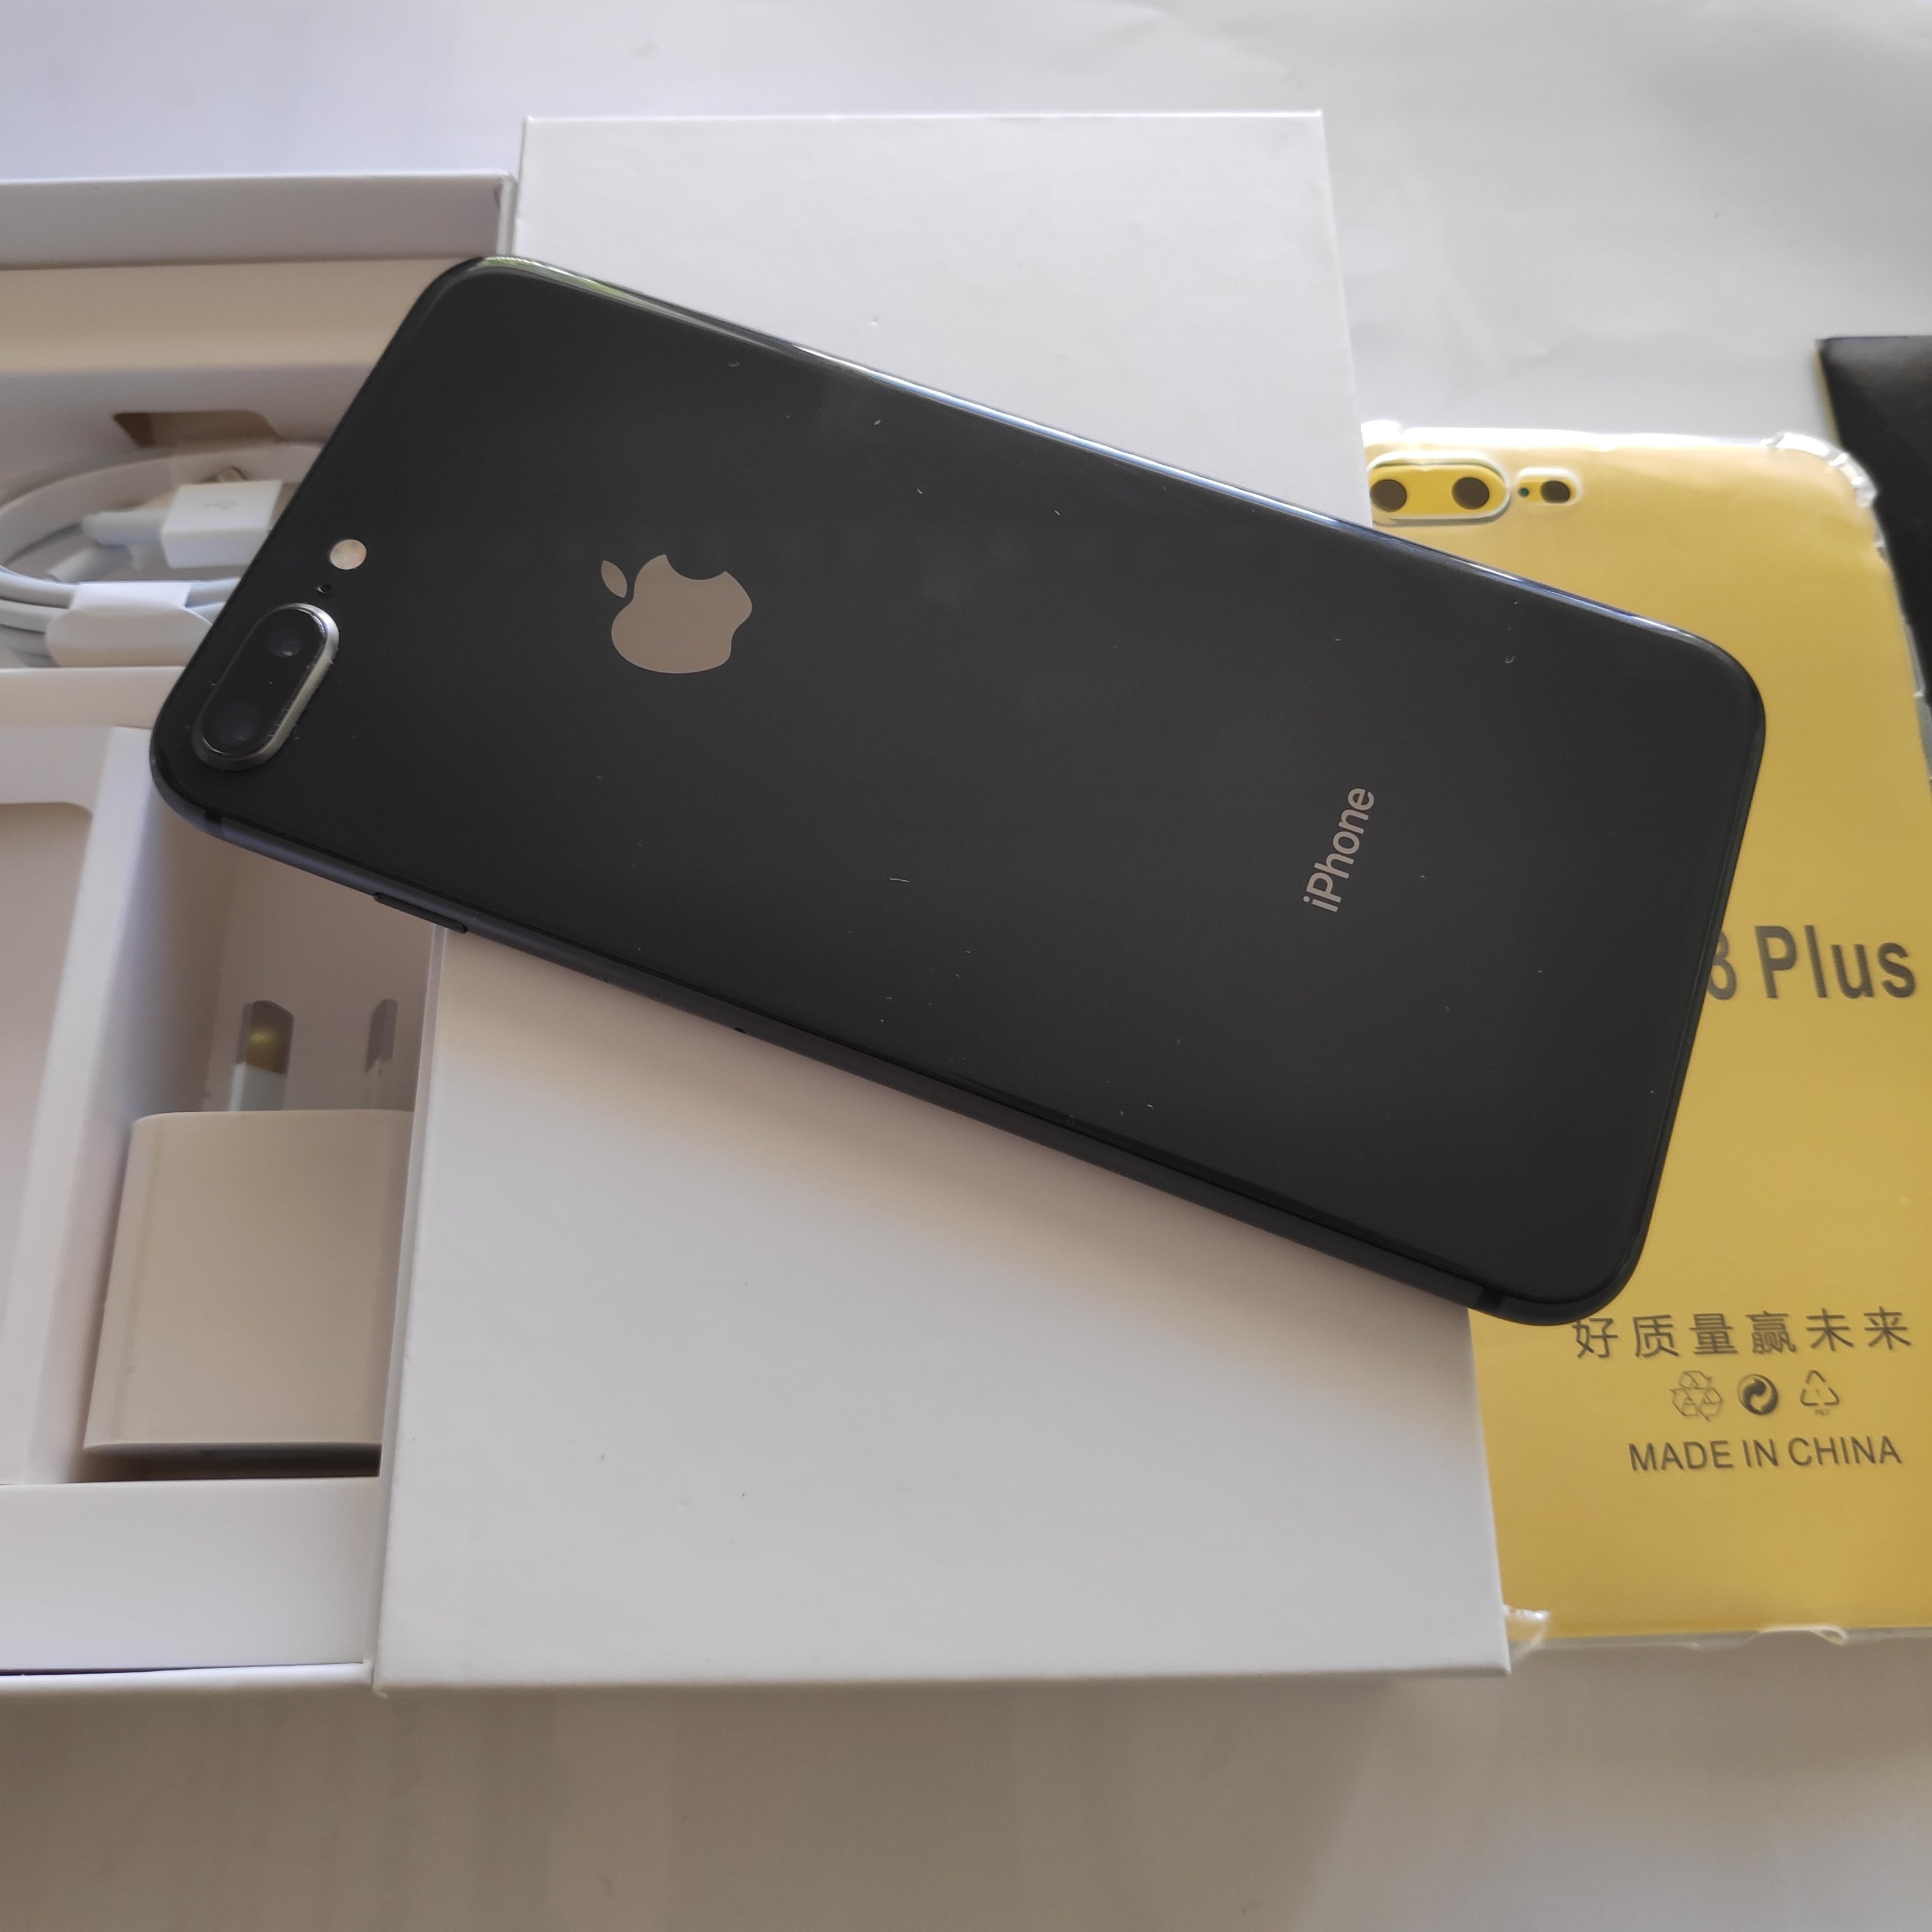 iphone with afterpay,second hand iphone 8 plus,Cheap iPhone 8 Plus